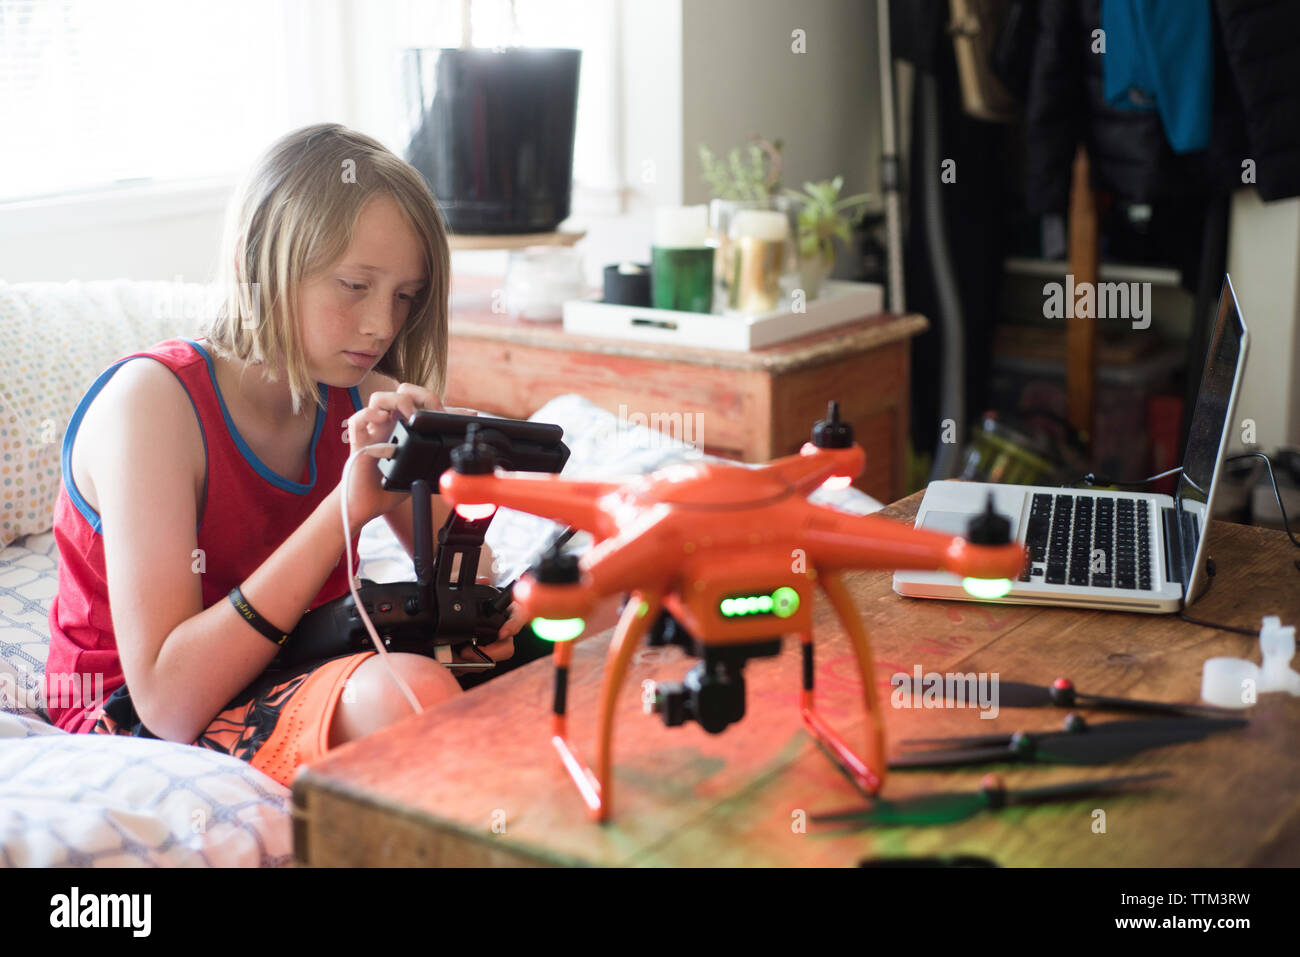 Boy examining remote control of drone at home Stock Photo